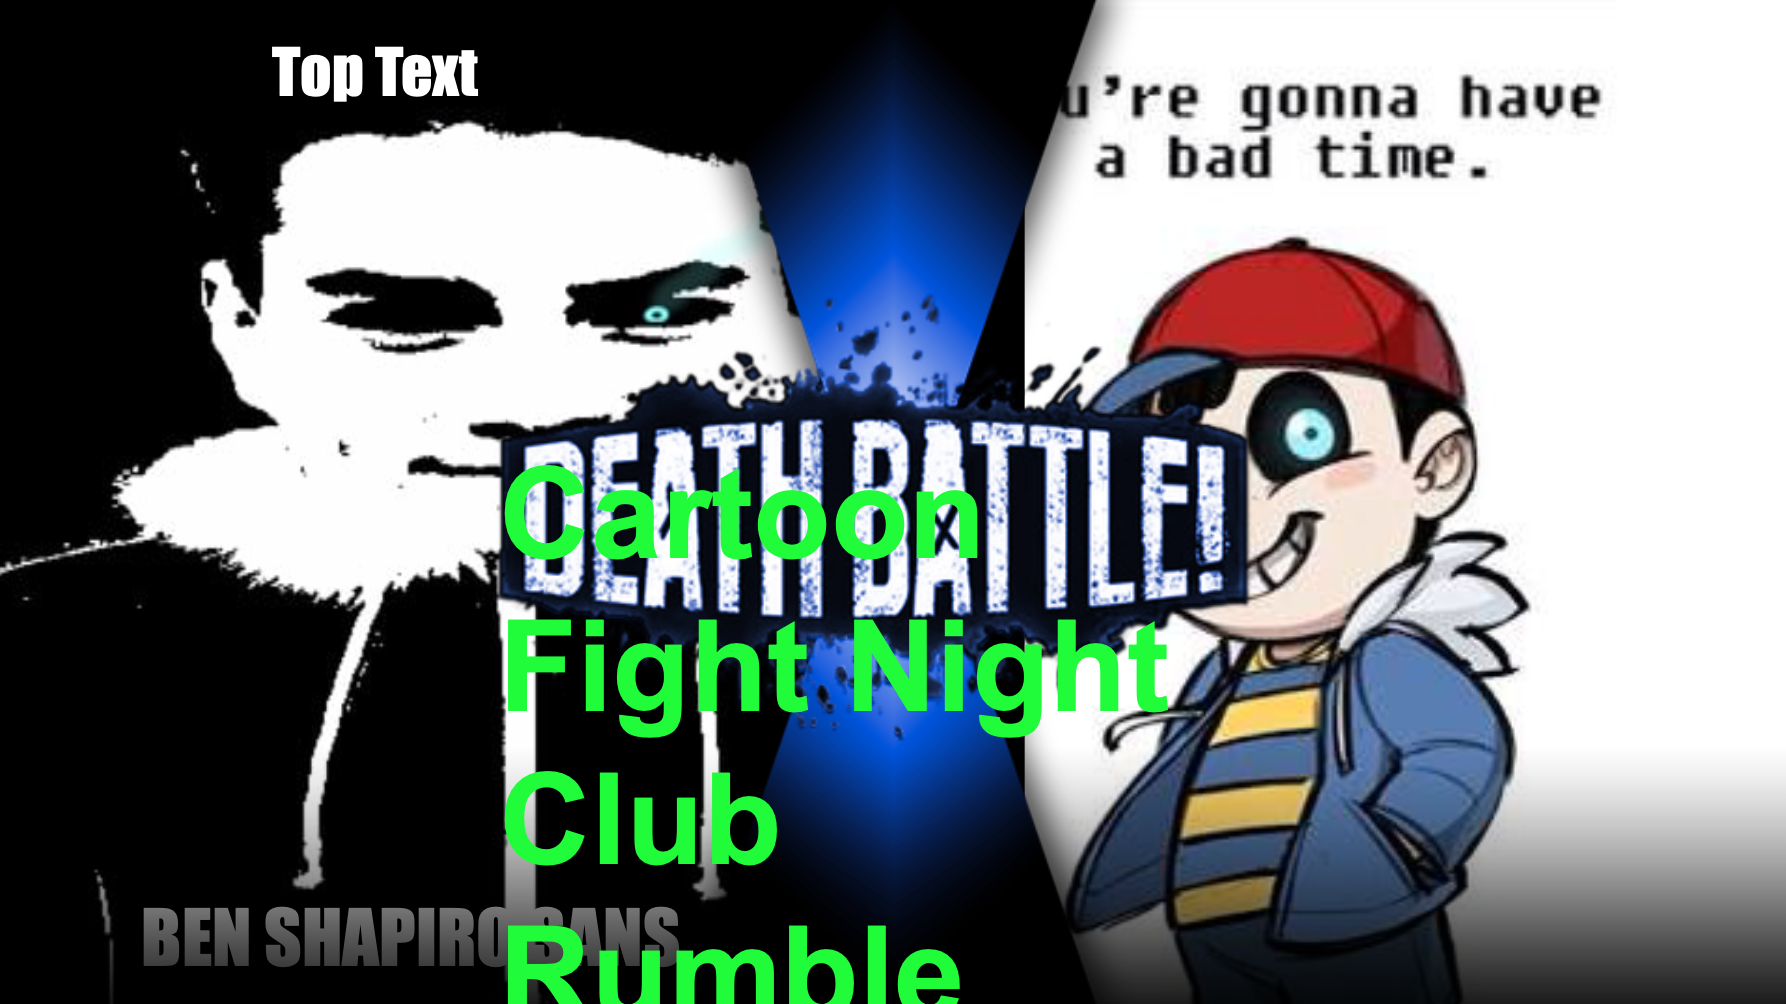 Daily Death Battle Ideas on X: #DailyDeathBattleIdea 122 The Snatcher (A  Hat in Time) vs Sans (Undertale) Bosses of indie games who break the rules  of their respective games in their fights